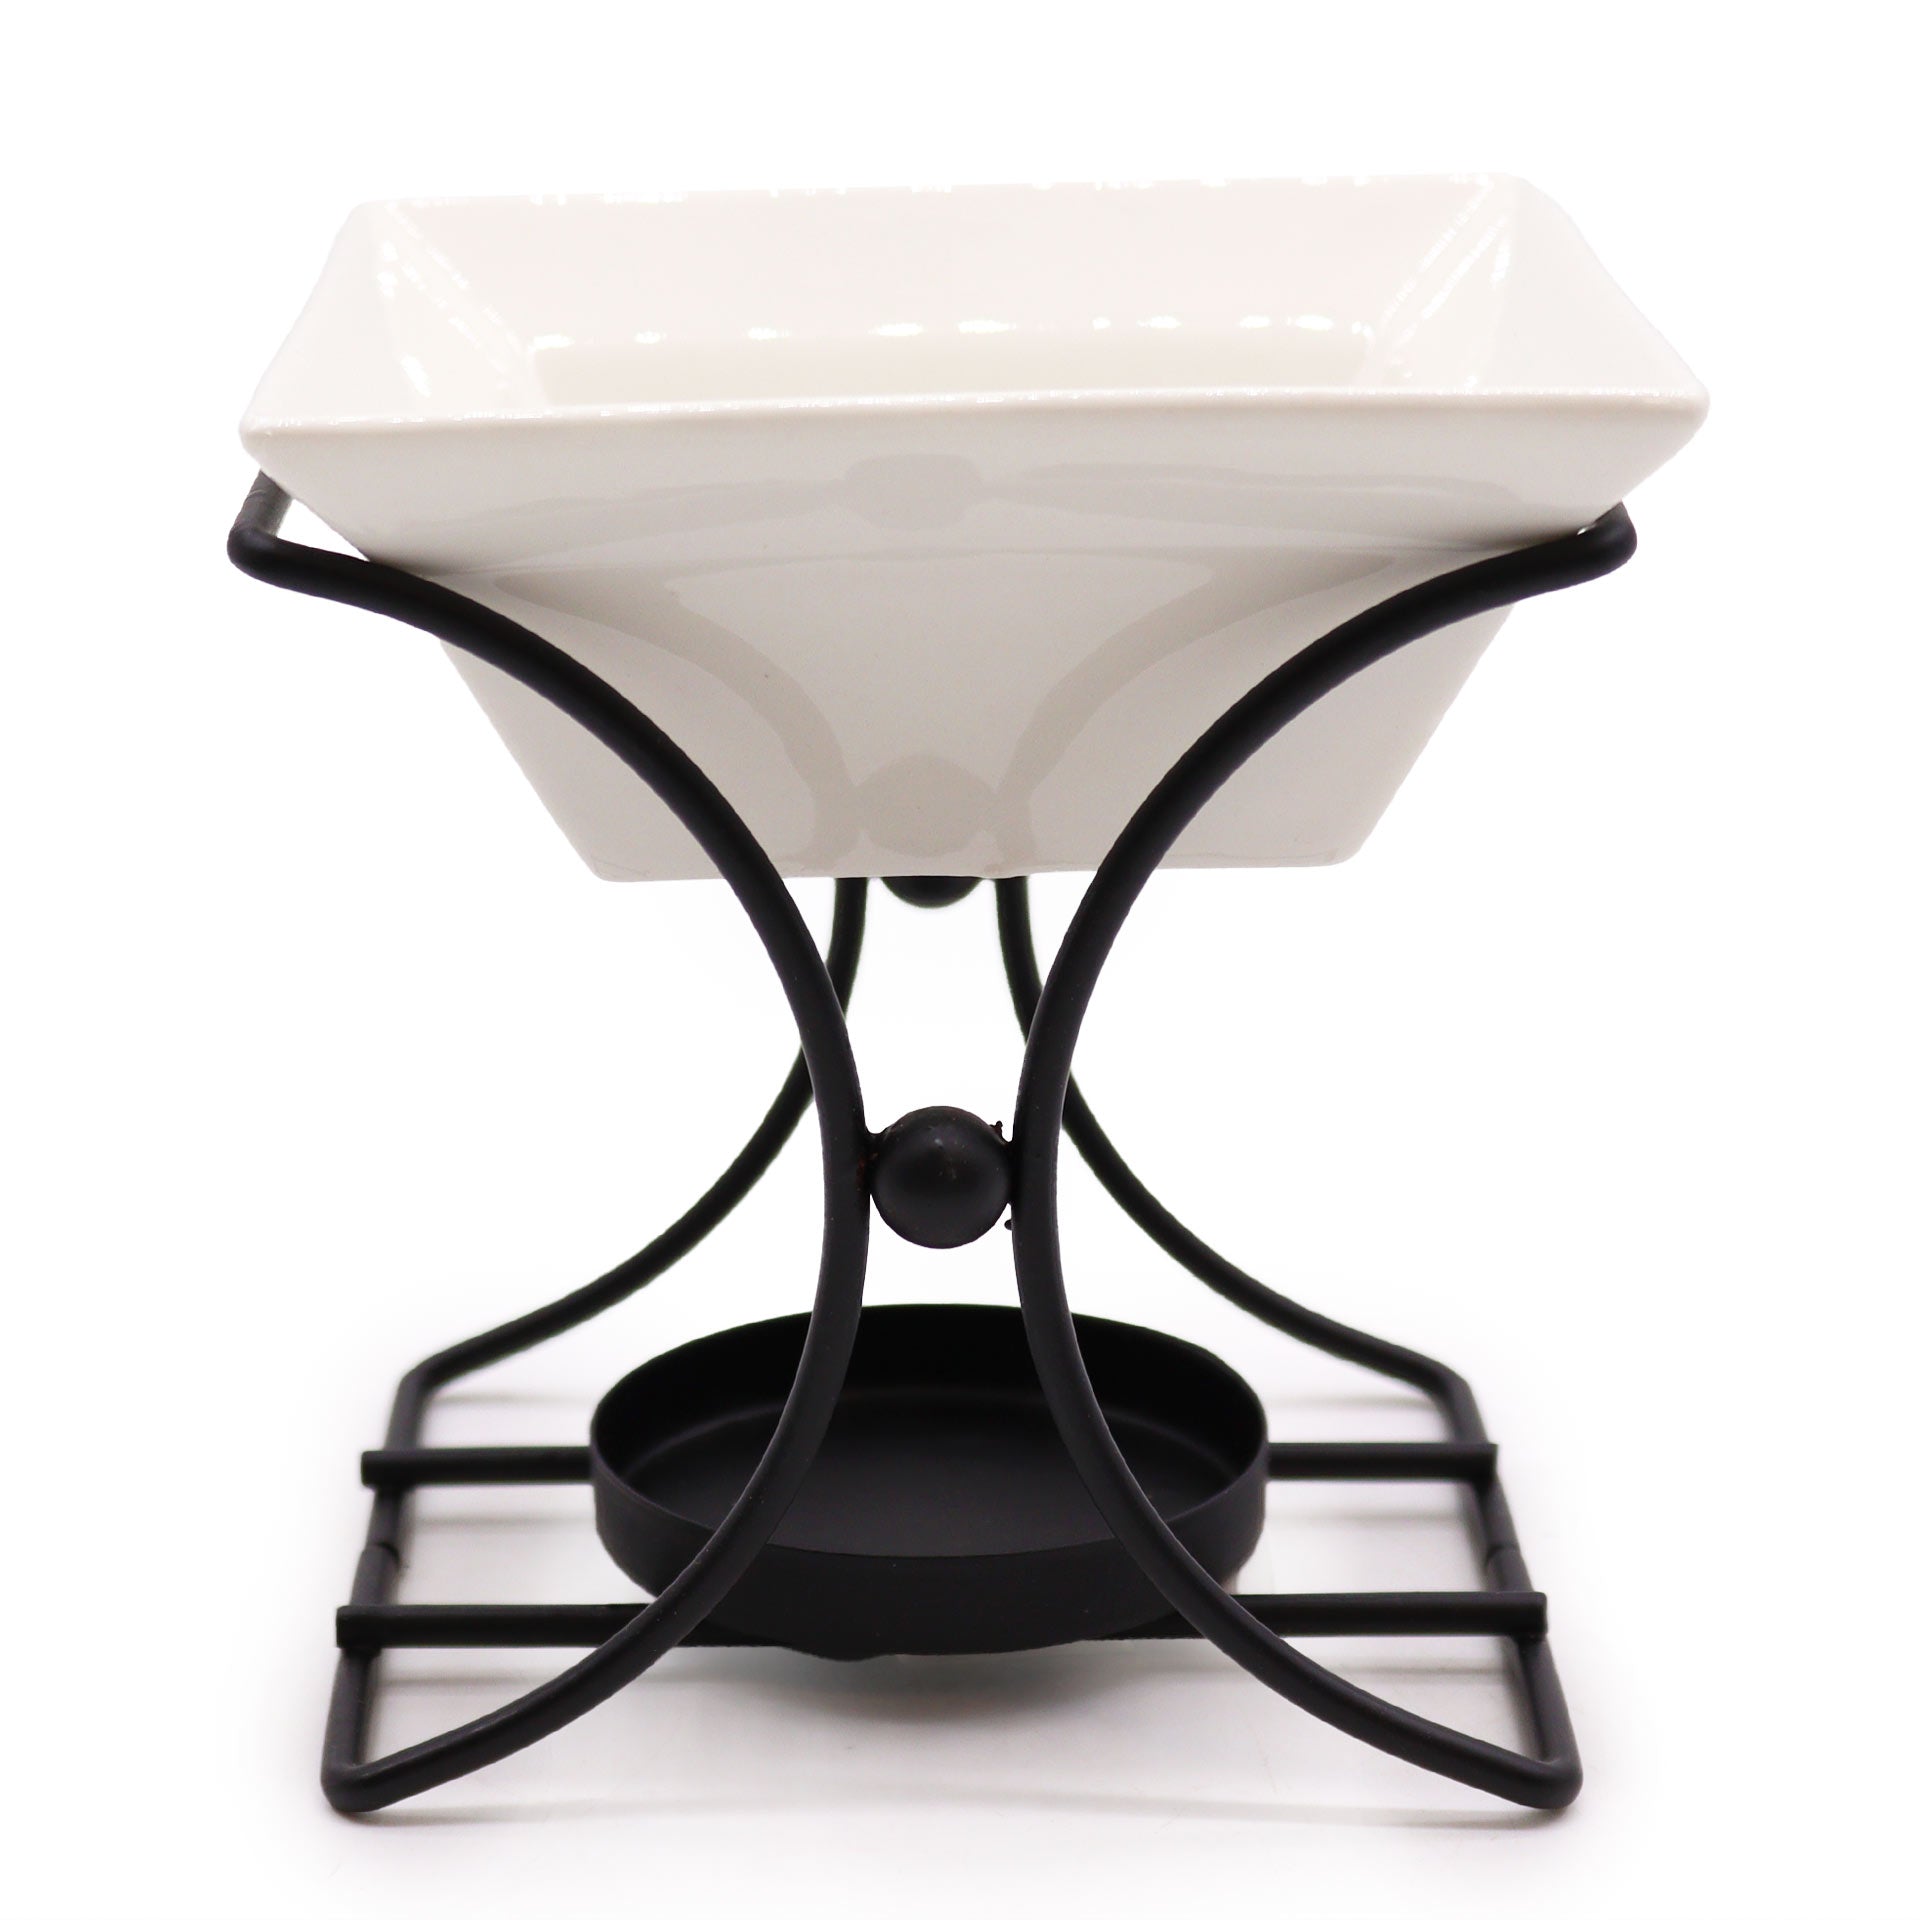 View Ceramic Metal Square Stand information